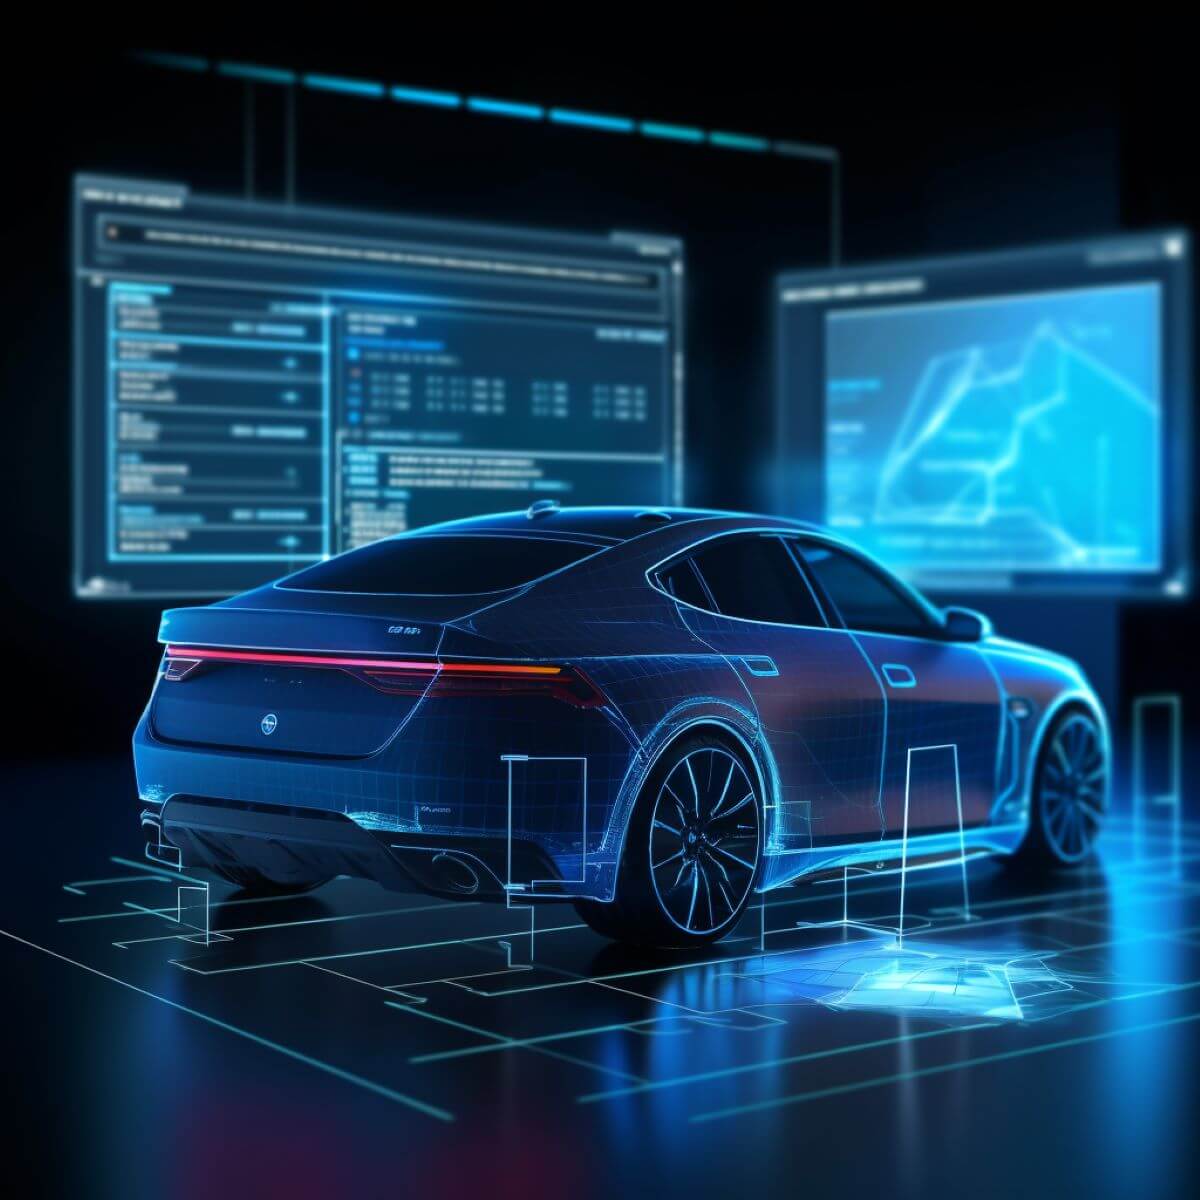 A futuristic car is showcased alongside a computer screen displaying automotive business intelligence.